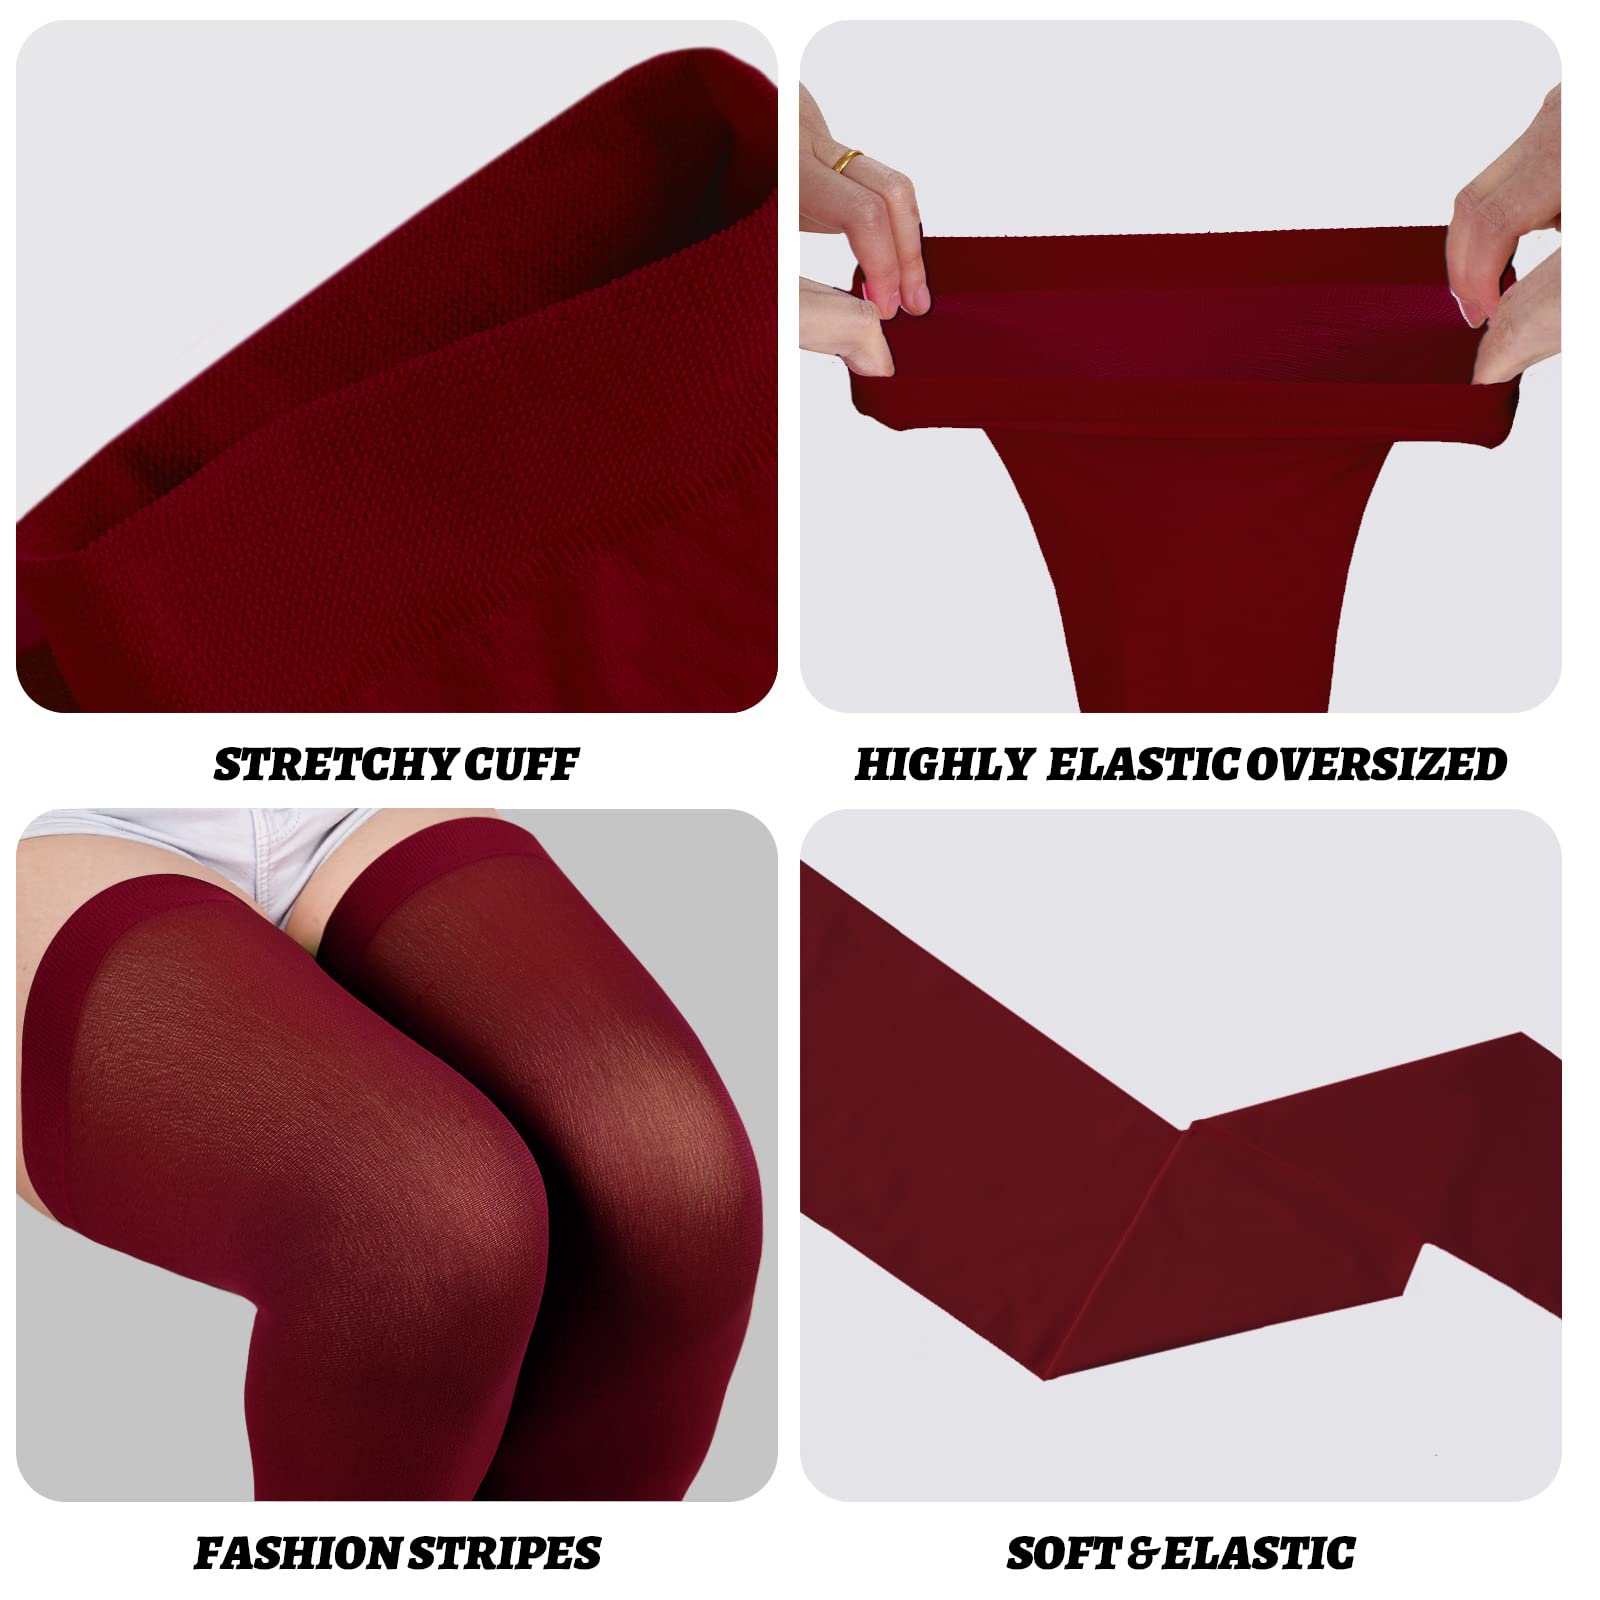 Extra Long Womens Opaque Over Knee High Stockings-Burgundy - Moon Wood